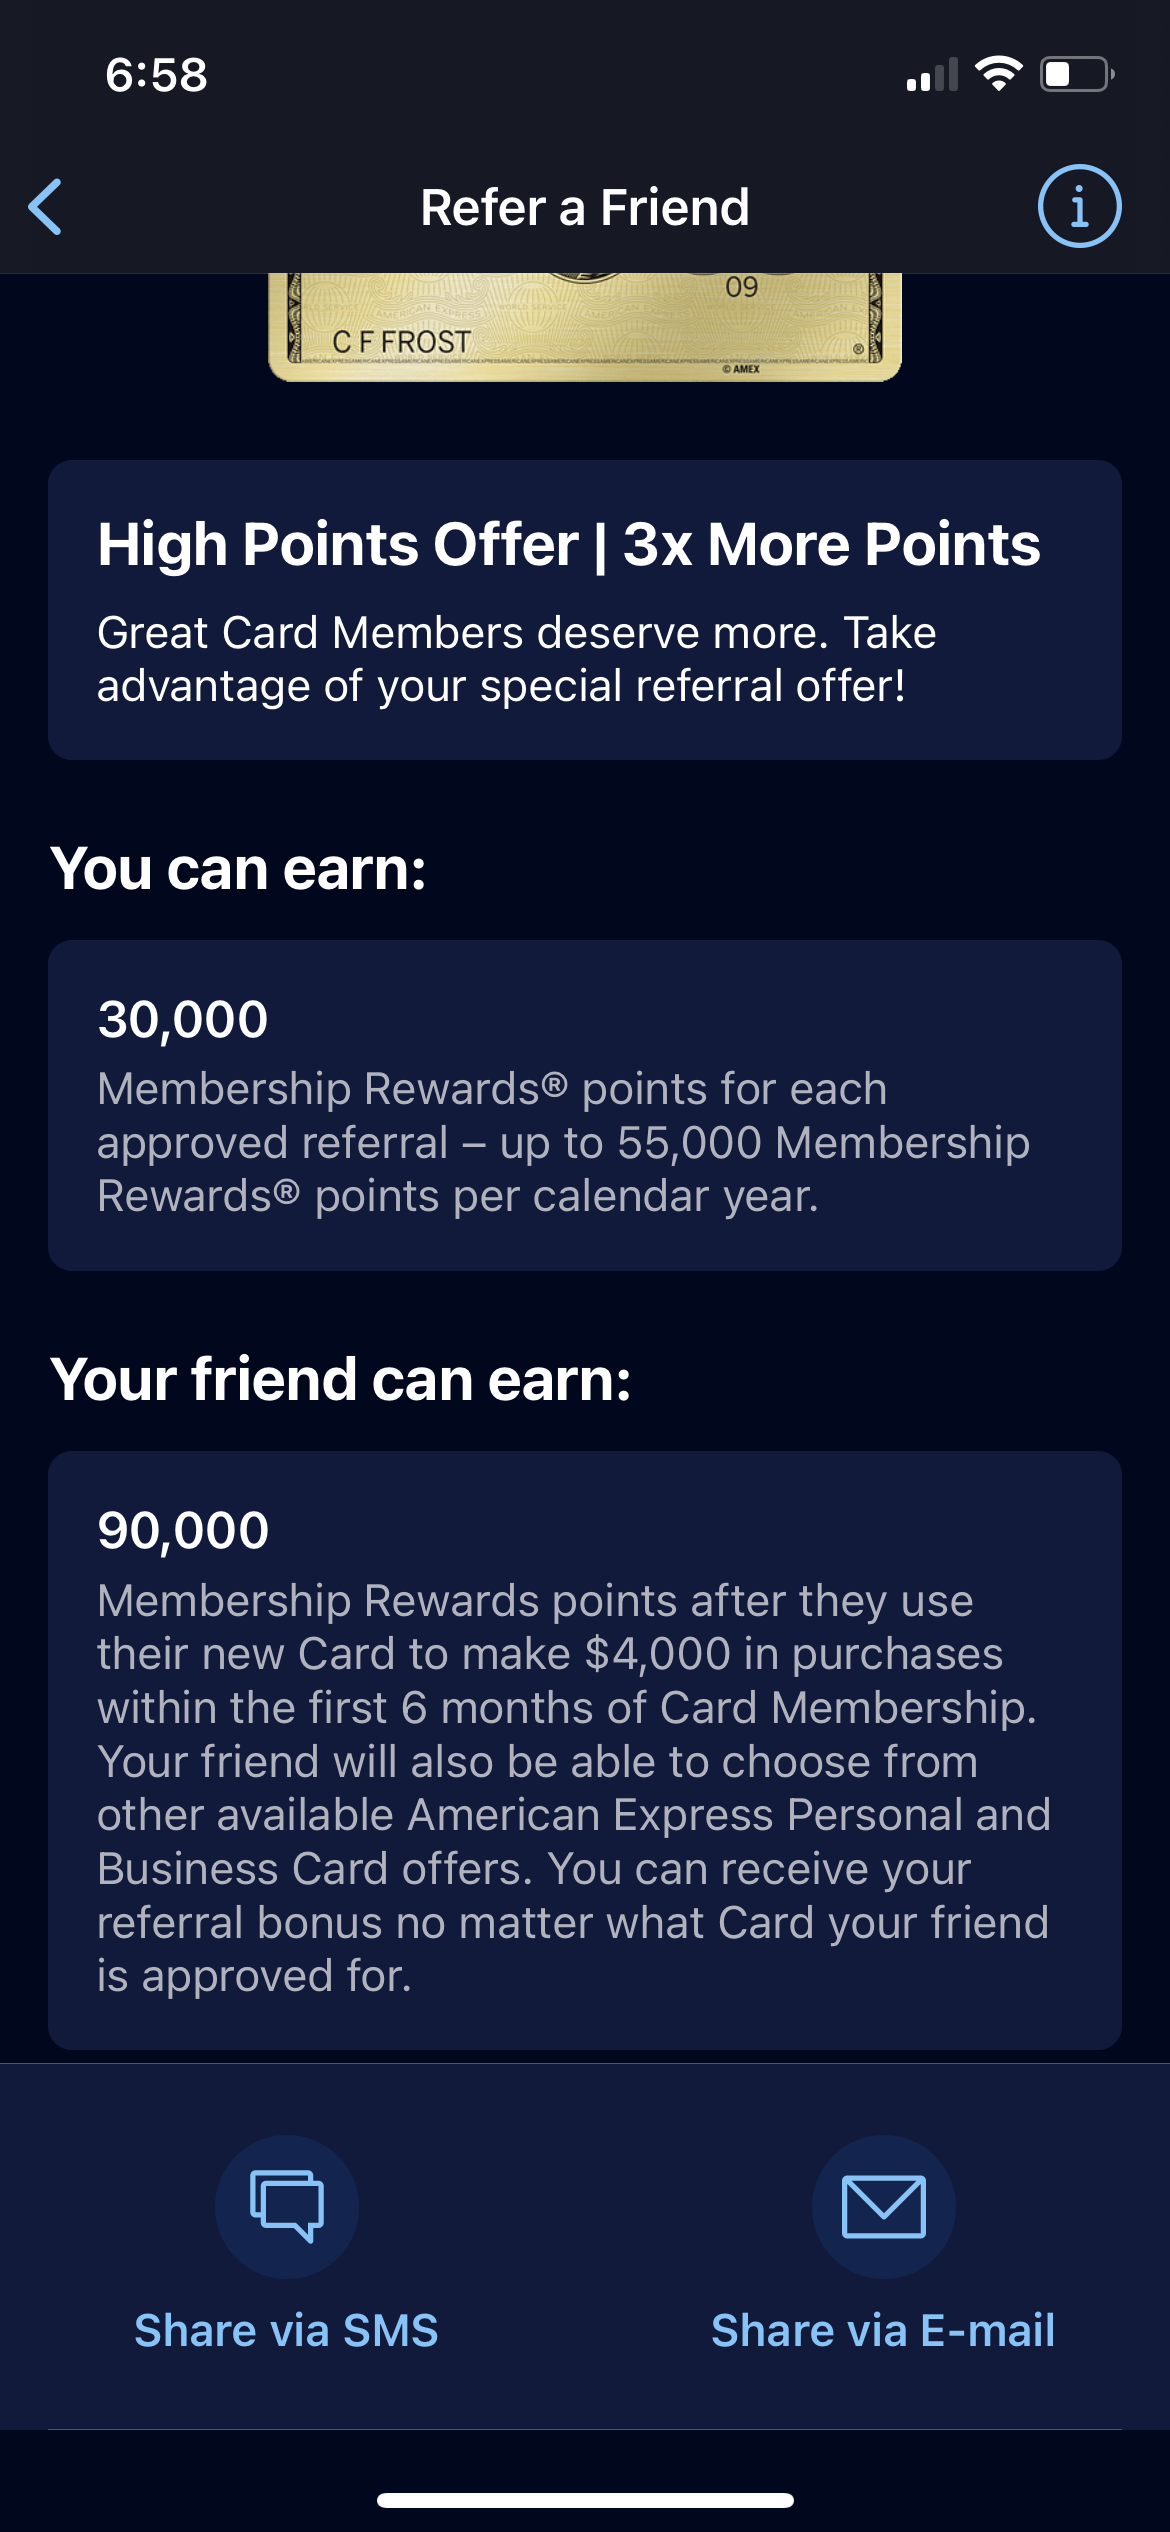 Amex Gold Refer a Friend. You get 30k they get 90k in points YMMV